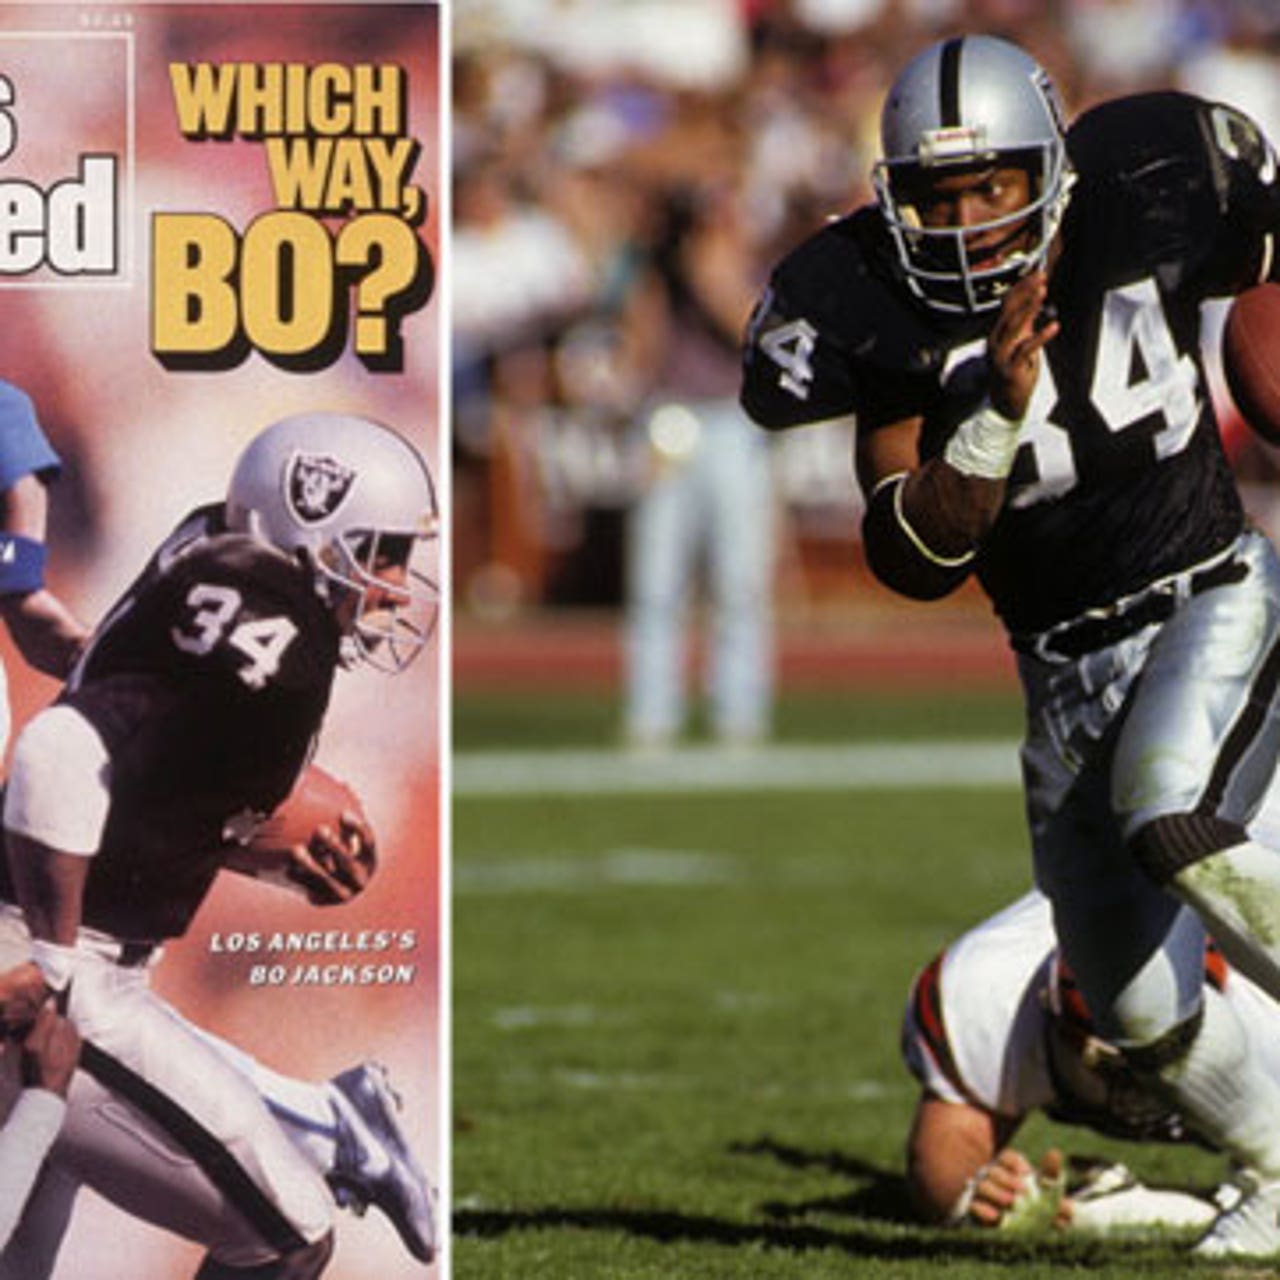 Where I'm Coming From - Bo Jackson's Elite Sports